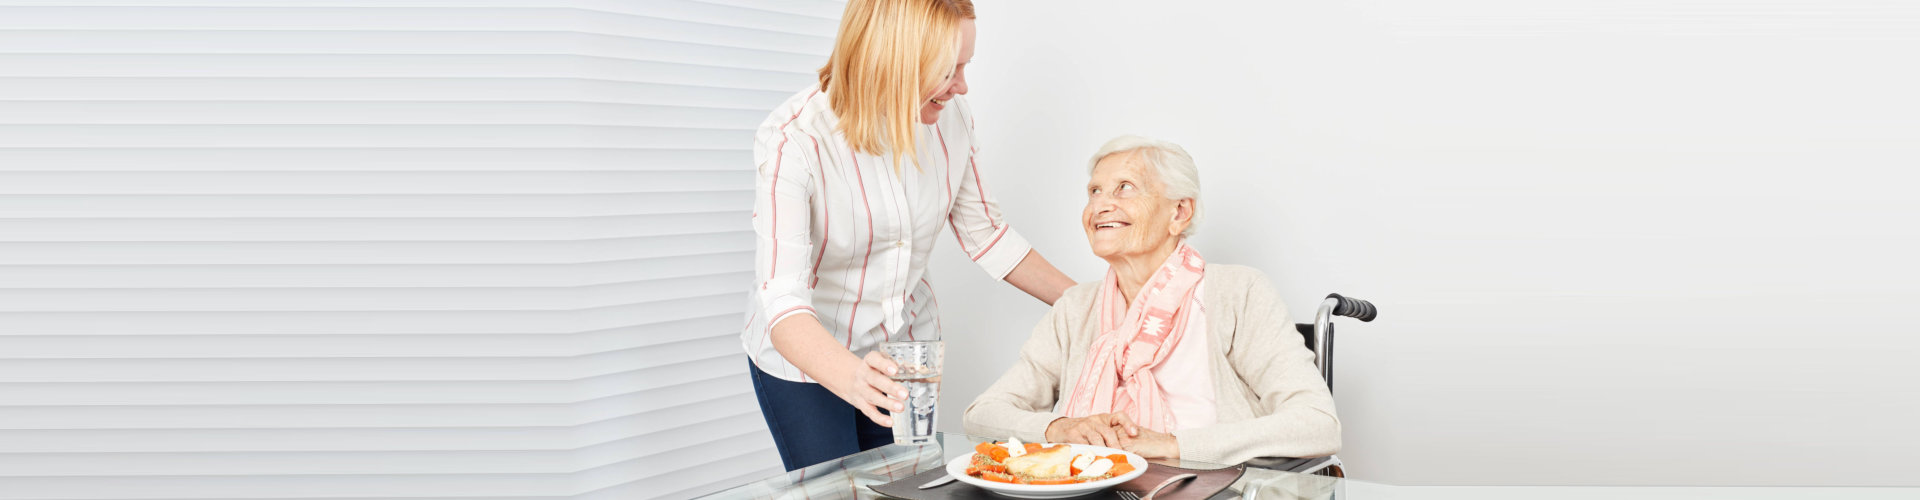 a caregiver giving meal to the senior woman